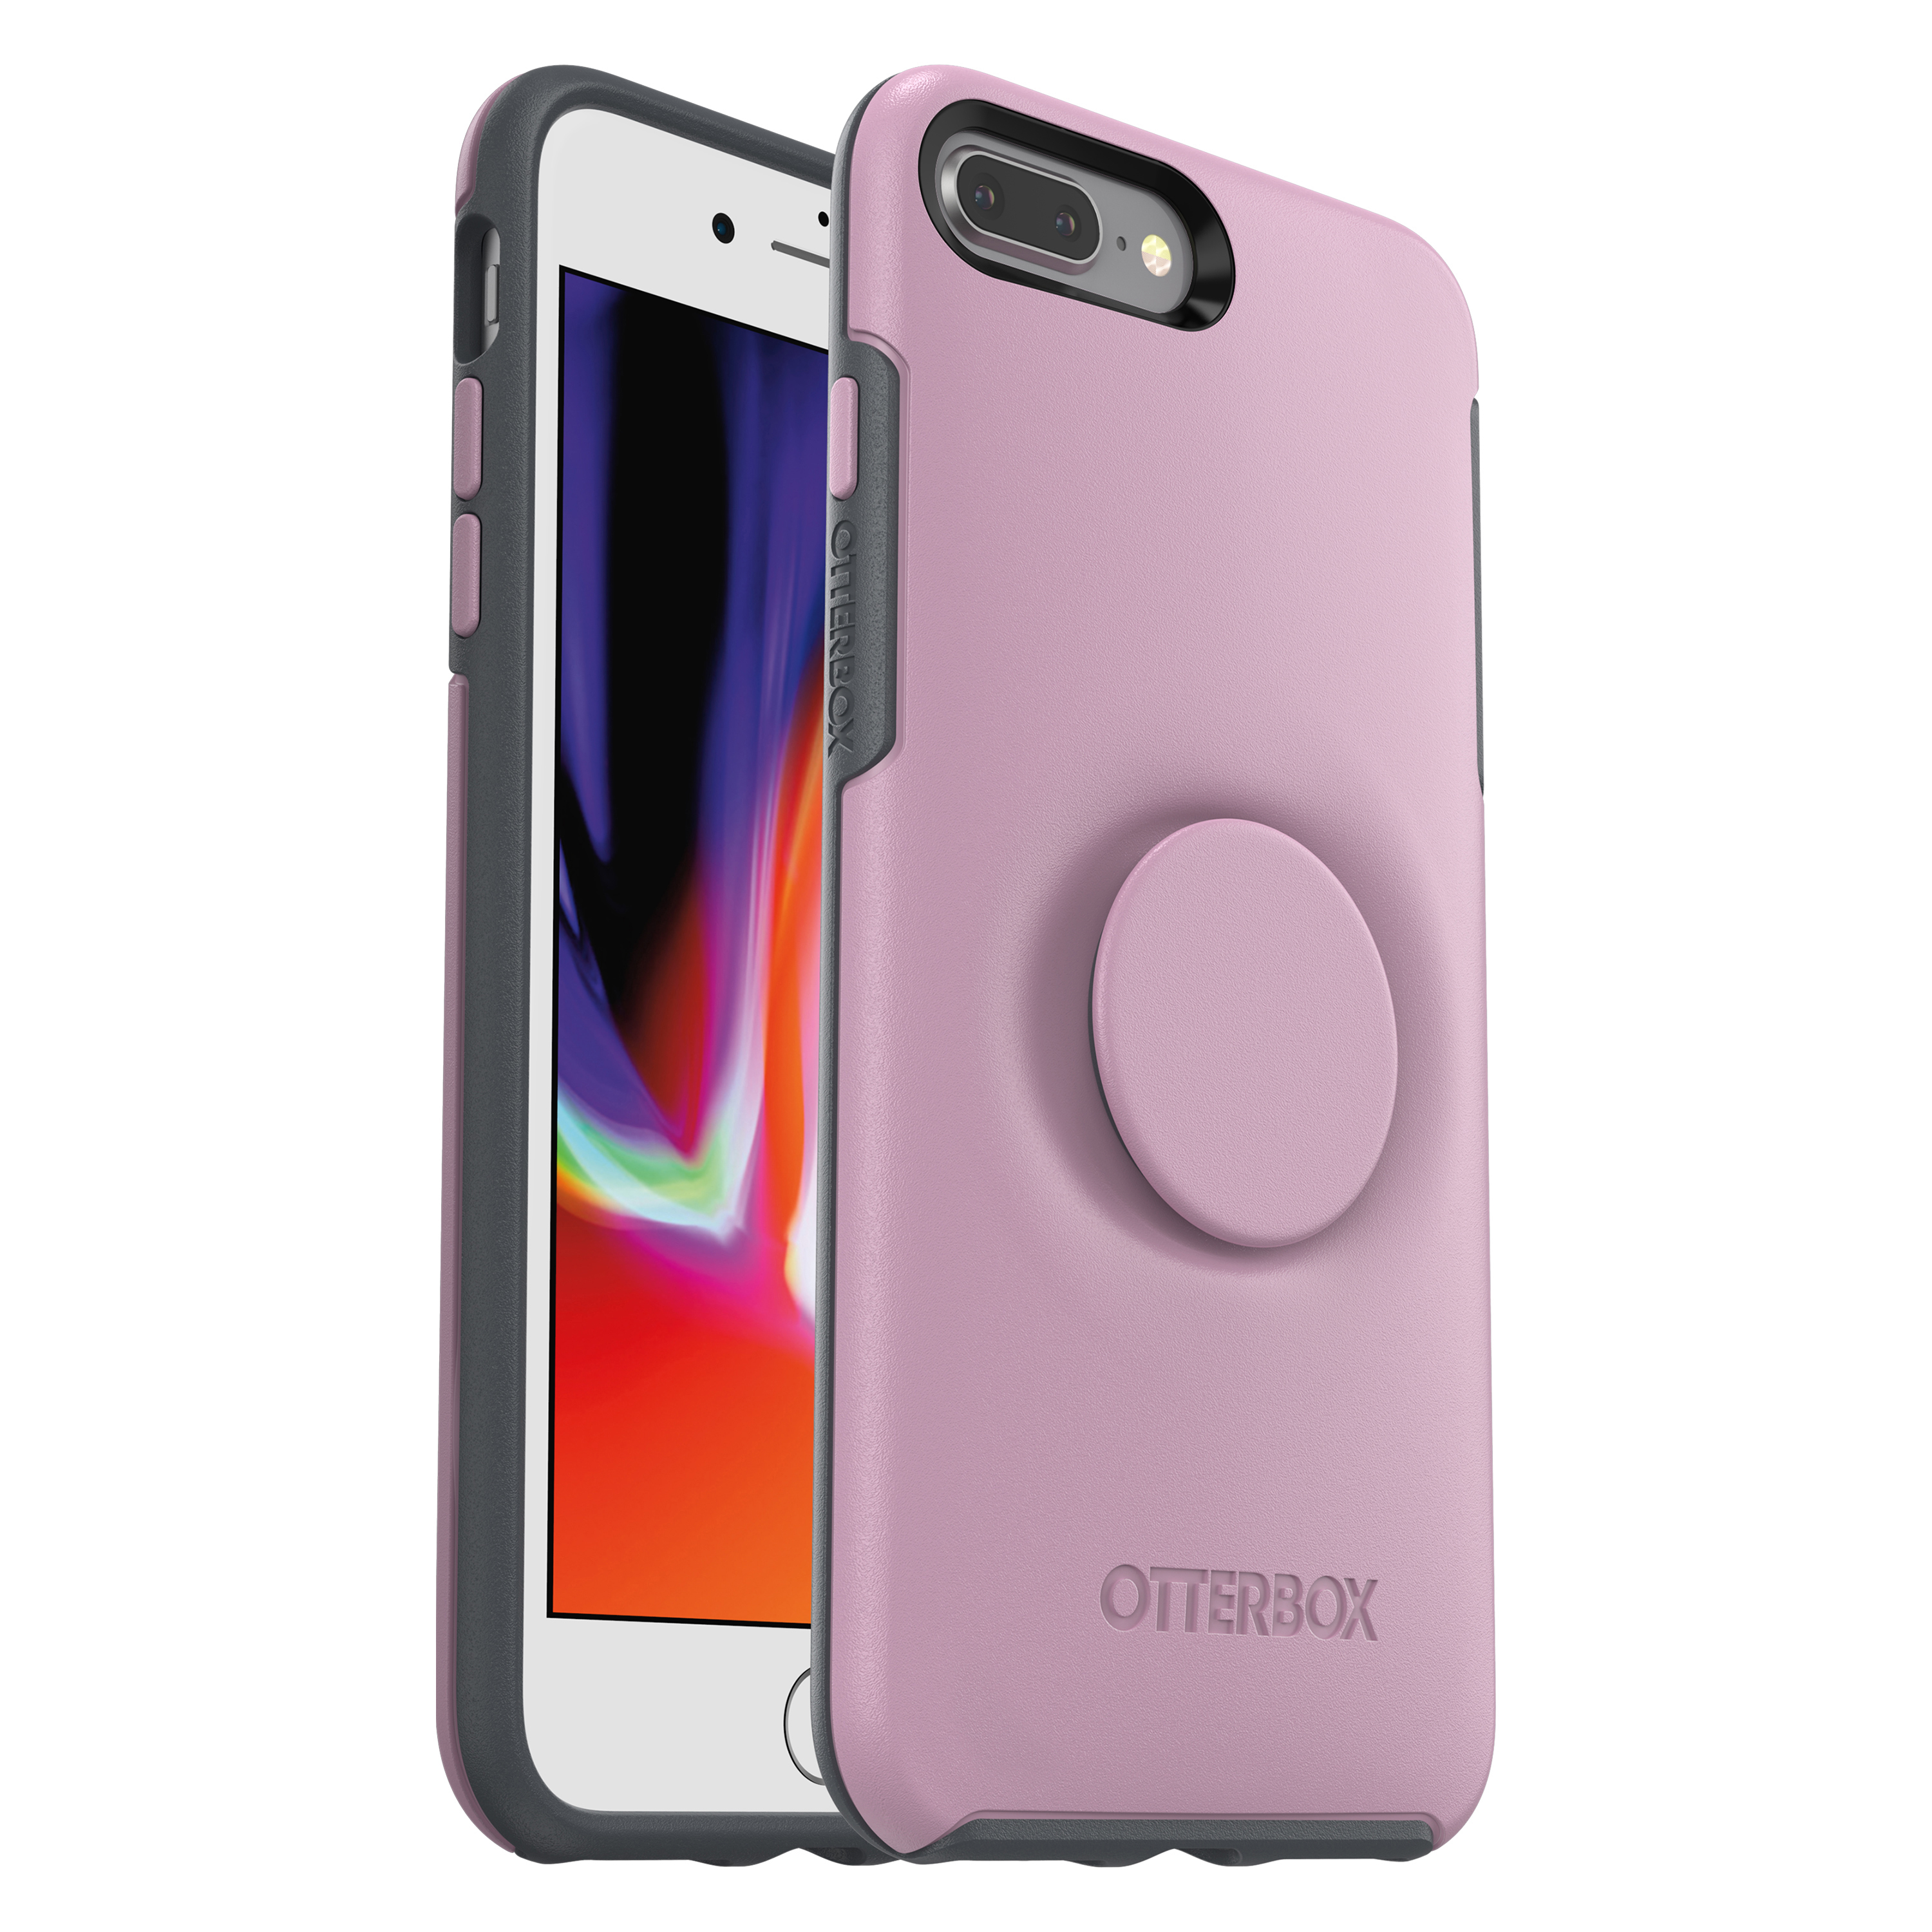 Plus, Pink Apple, Otter Backcover, Plus, Symmetry, 8 iPhone 7 + OTTERBOX iPhone Pop